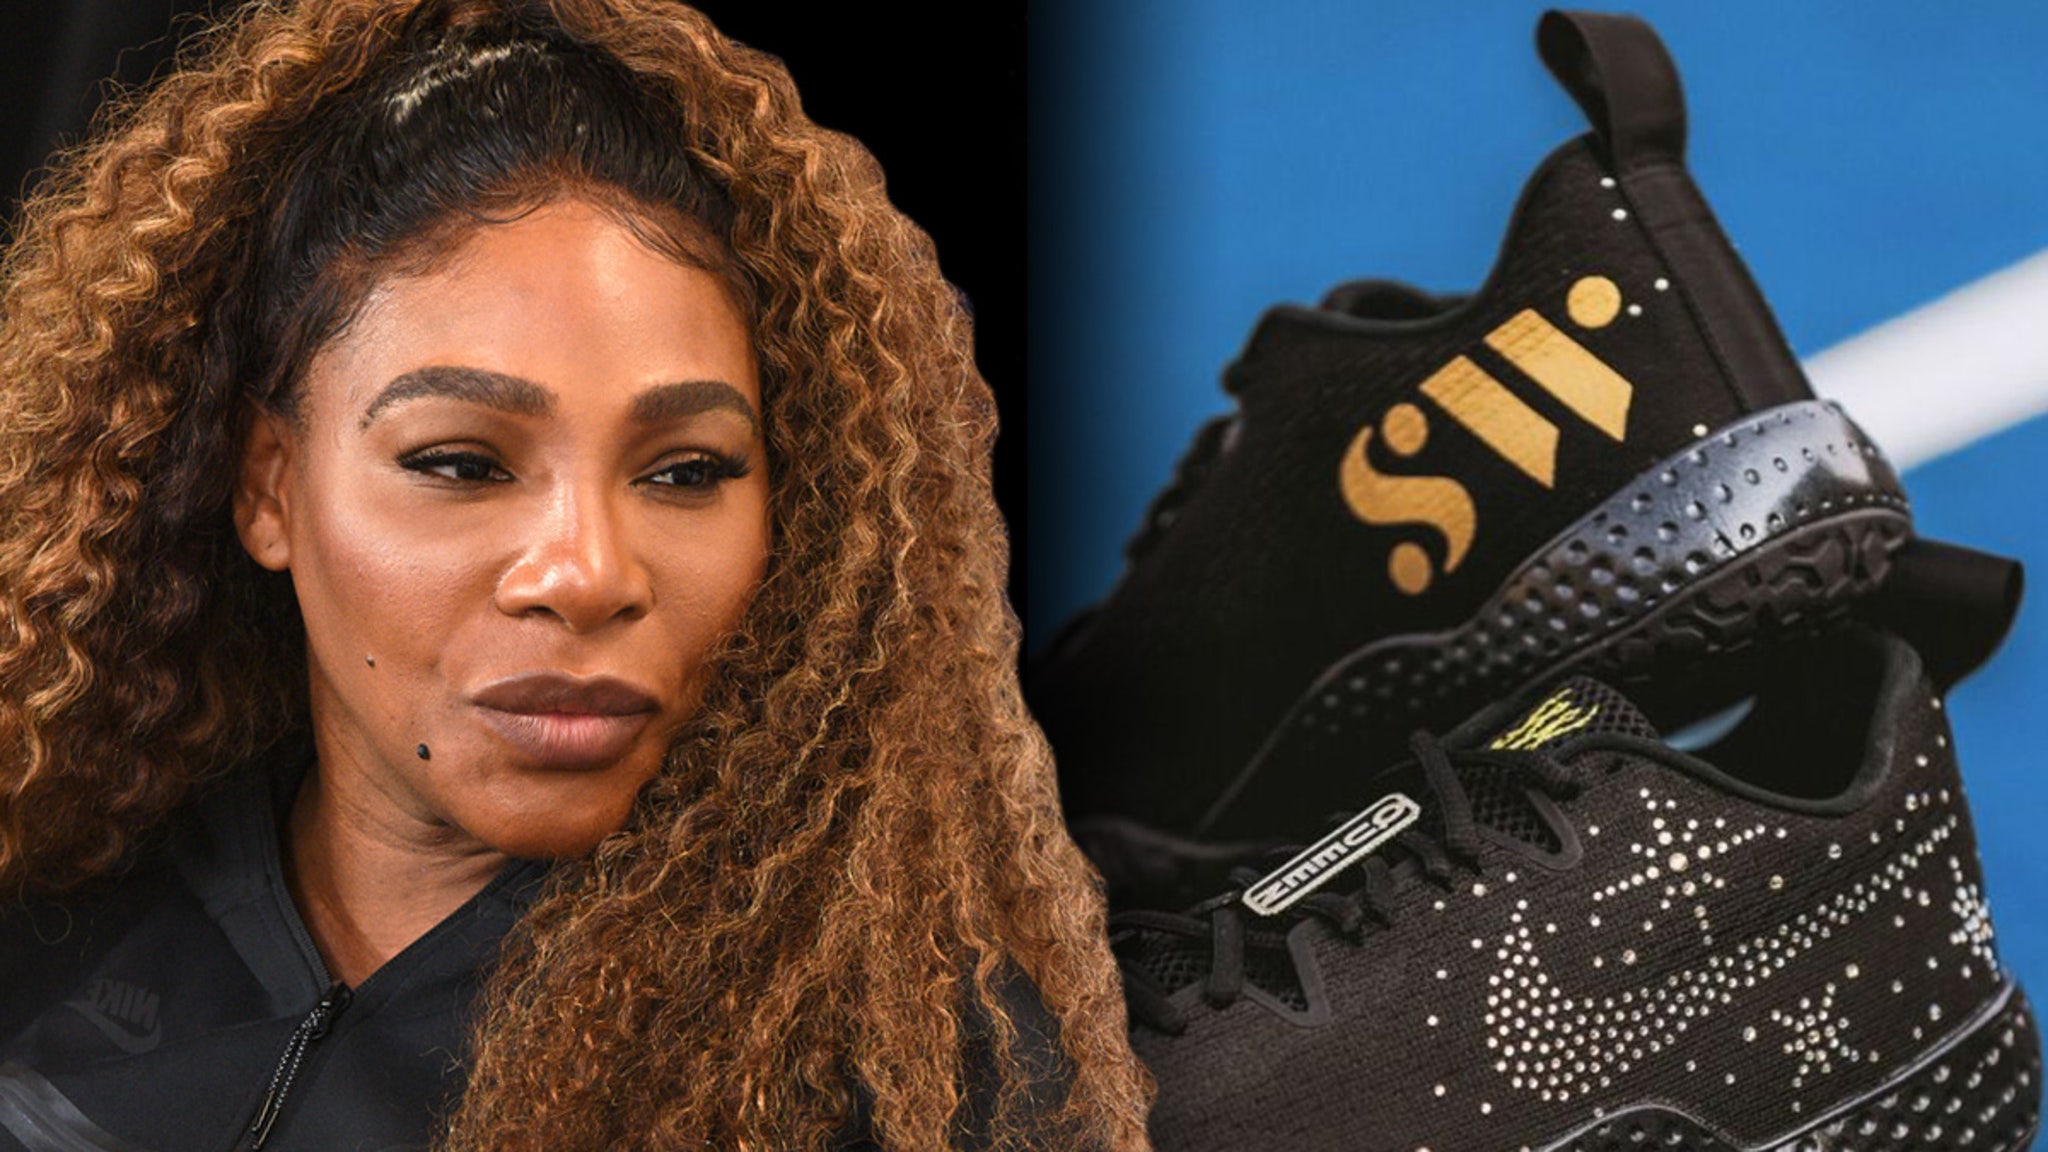 Serena Williams will wear diamond-encrusted shoes for the last US Open